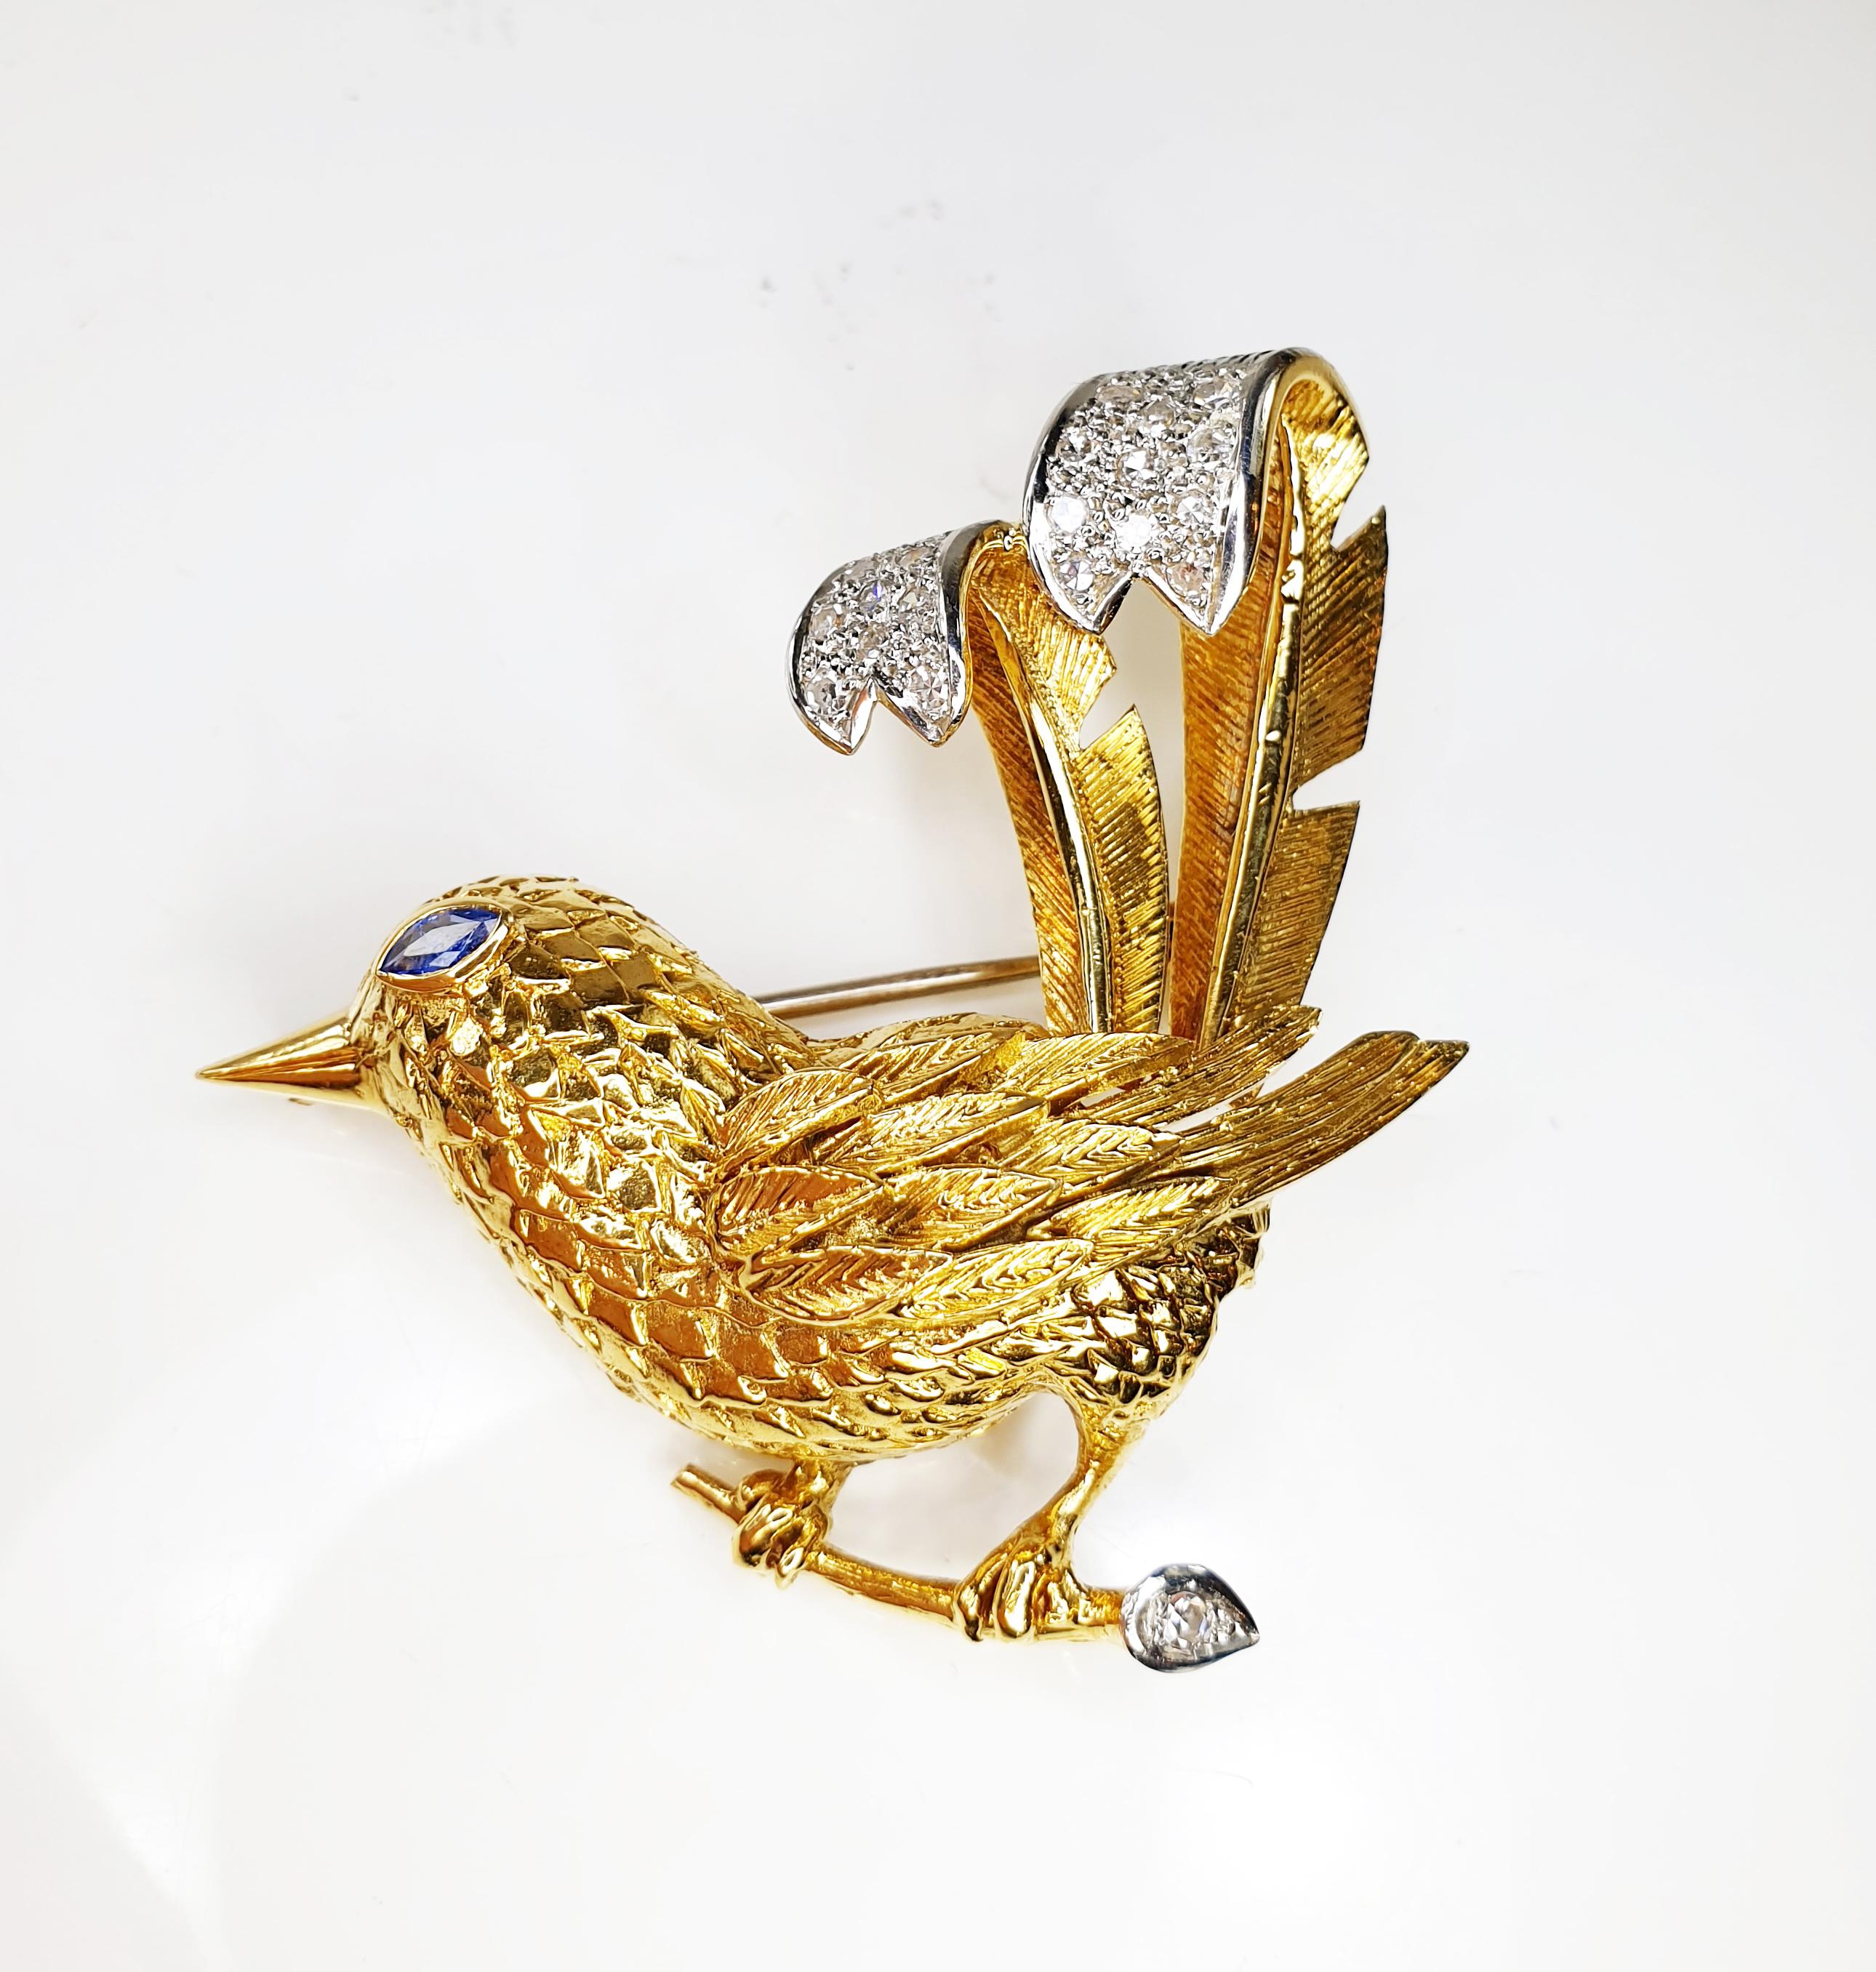 Delicate vintage pin brooch in the shape of a bird pearched on a twig. 
Chiseled in yellow gold, the tail in pavè of diamonds in white gold and a Sapphire eye.

MATERIALS
◘ Weight 14.9 grams 
◘ Size 47mm  / 1.85 inches 
◘ Diamonds aprox 0.40ct 
◘